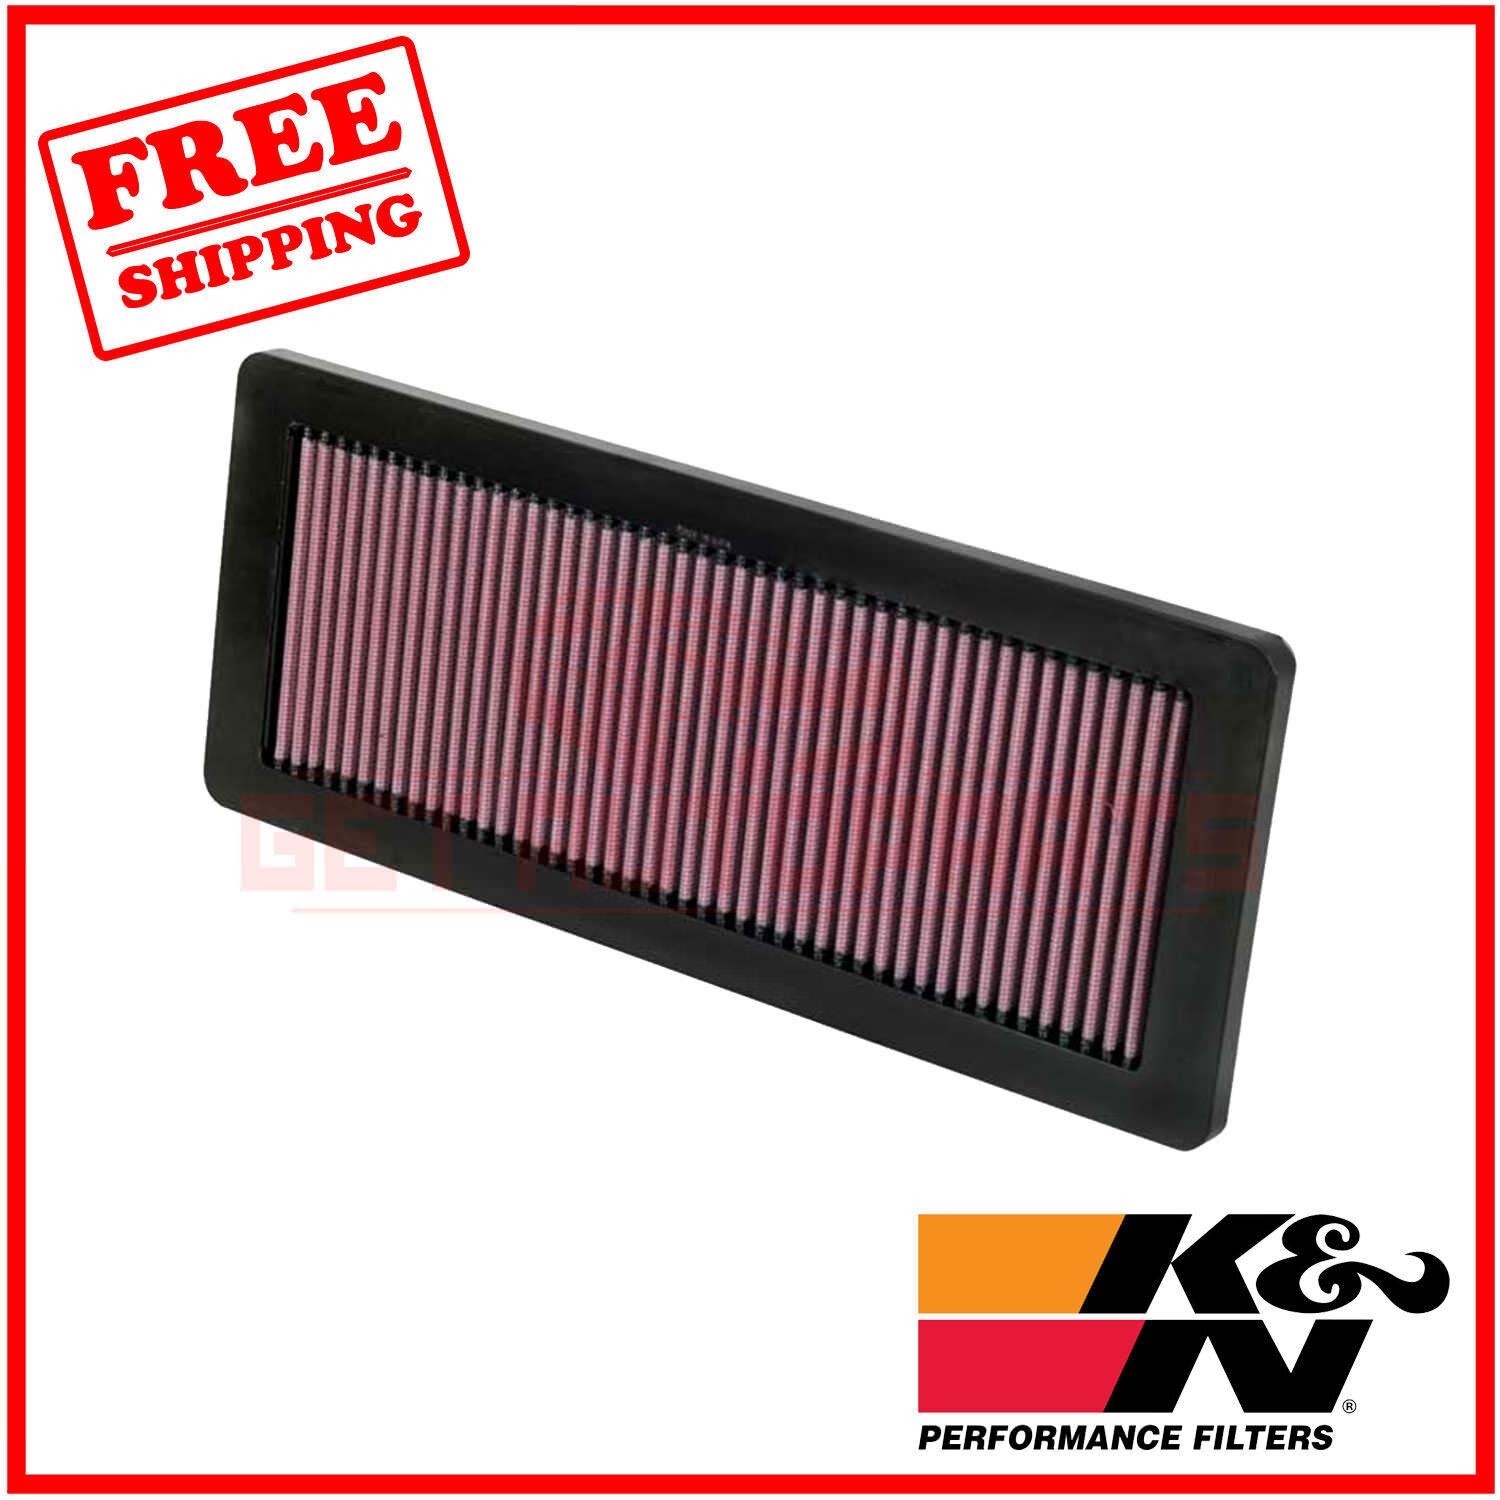 K&N Replacement Air Filter for Mini Cooper Countryman 2011-16